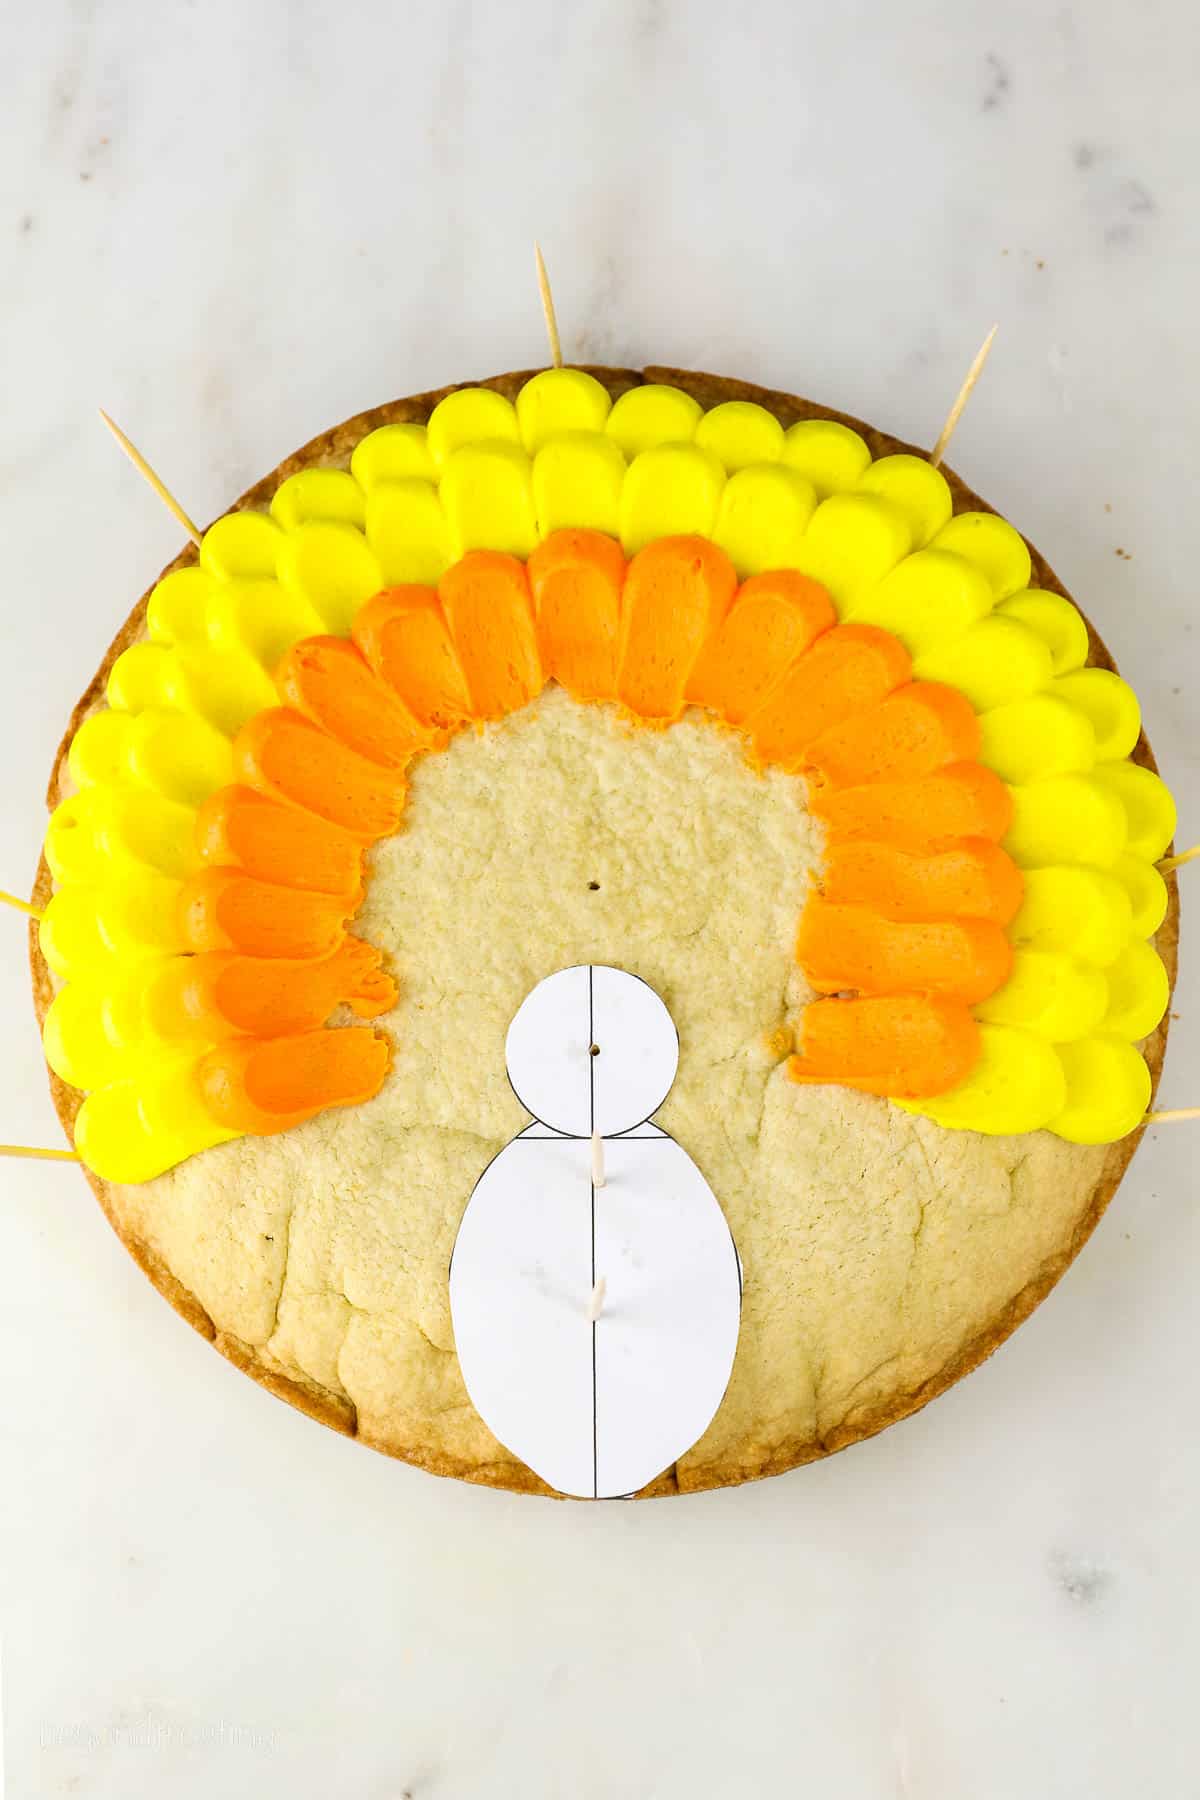 process photo of piped orange and yellow buttercream on a round cookie